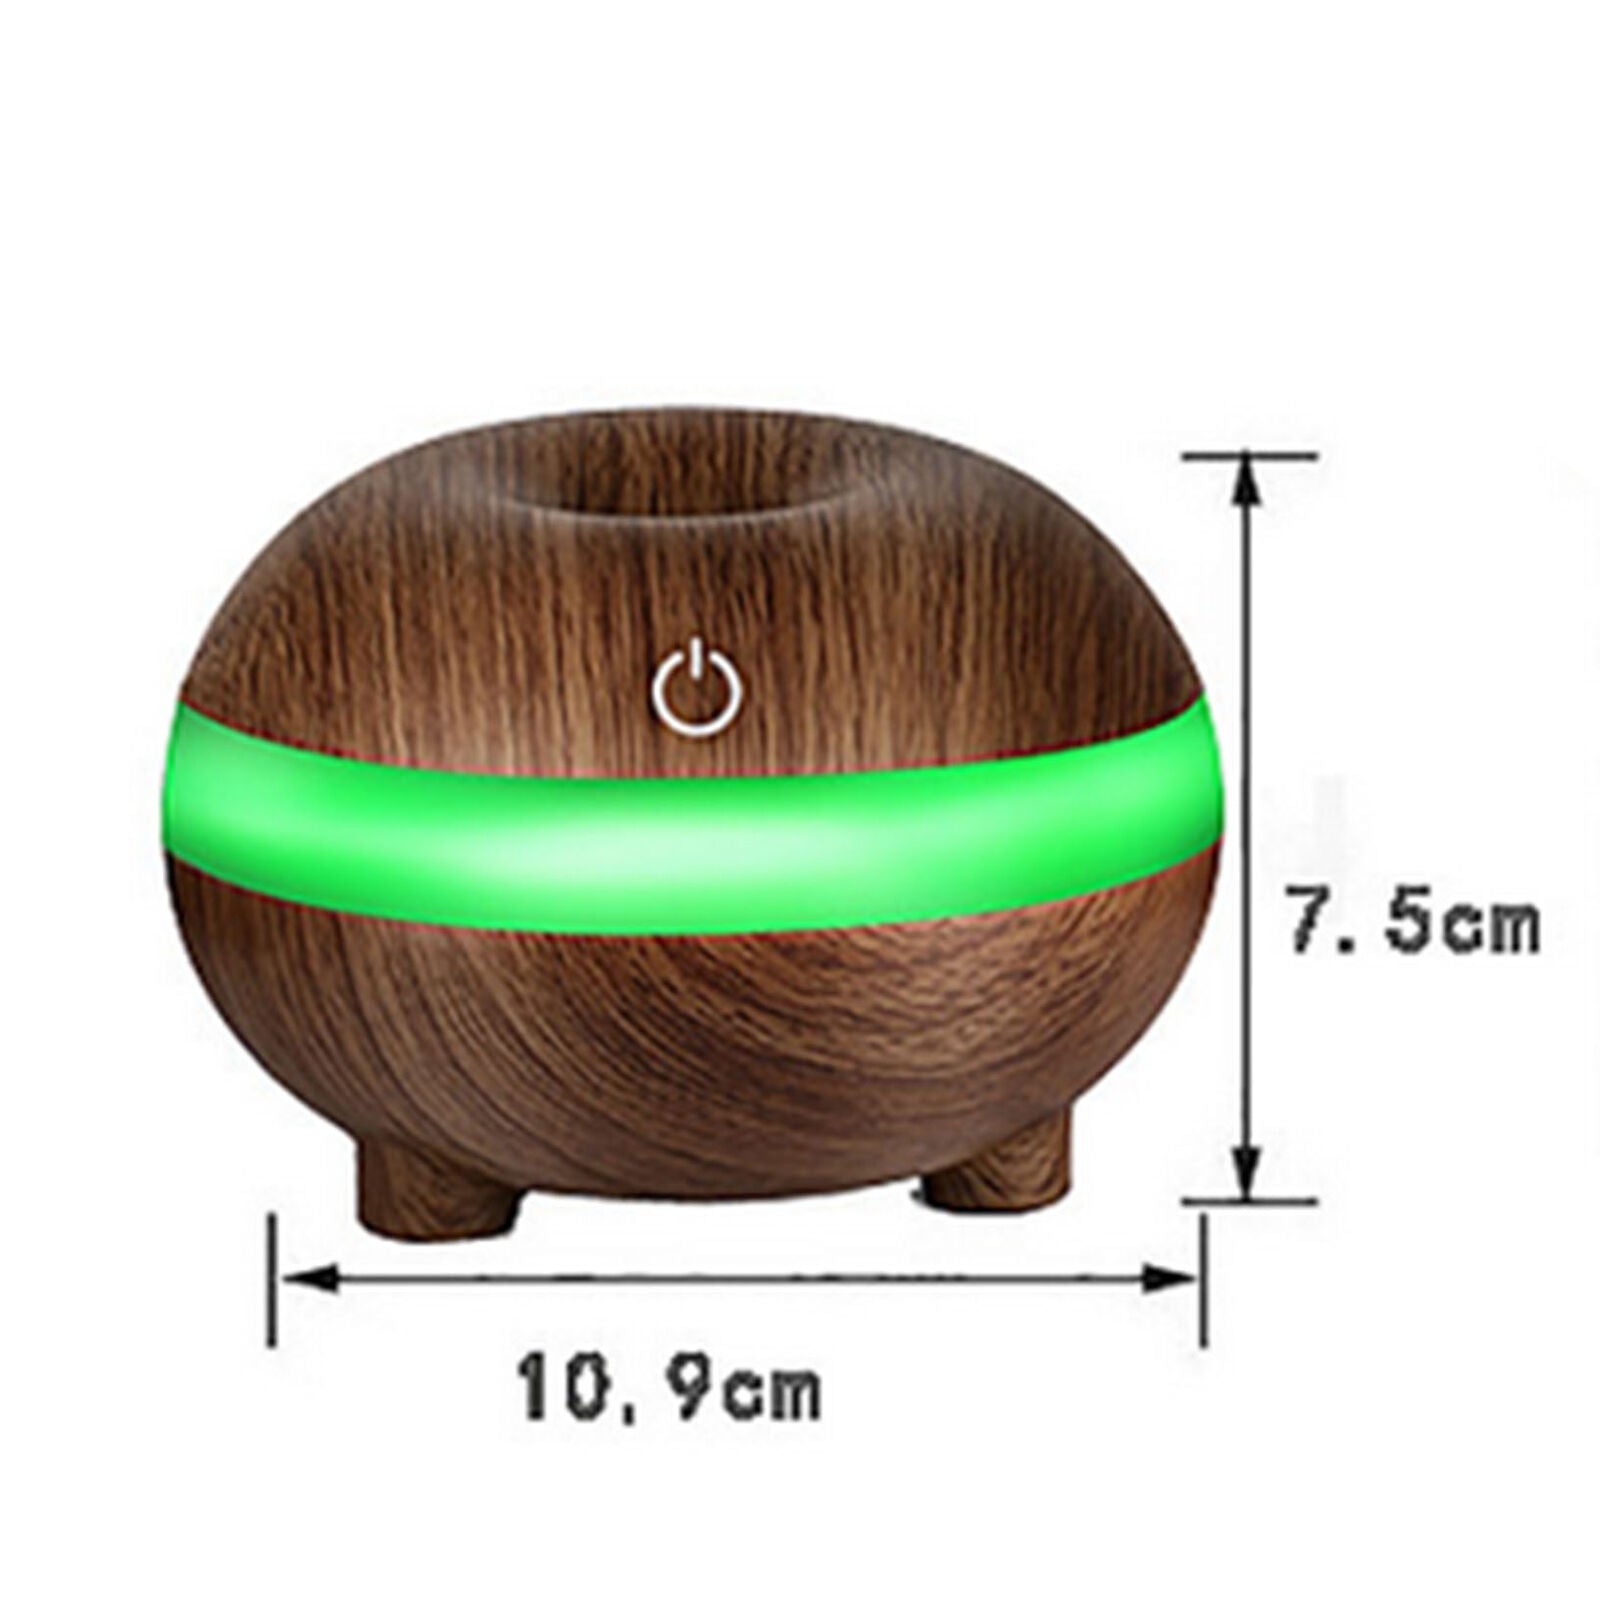 Aromatherapy Ultrasonic Humidifier Air Purifier Essential Oil Aroma Diffuser